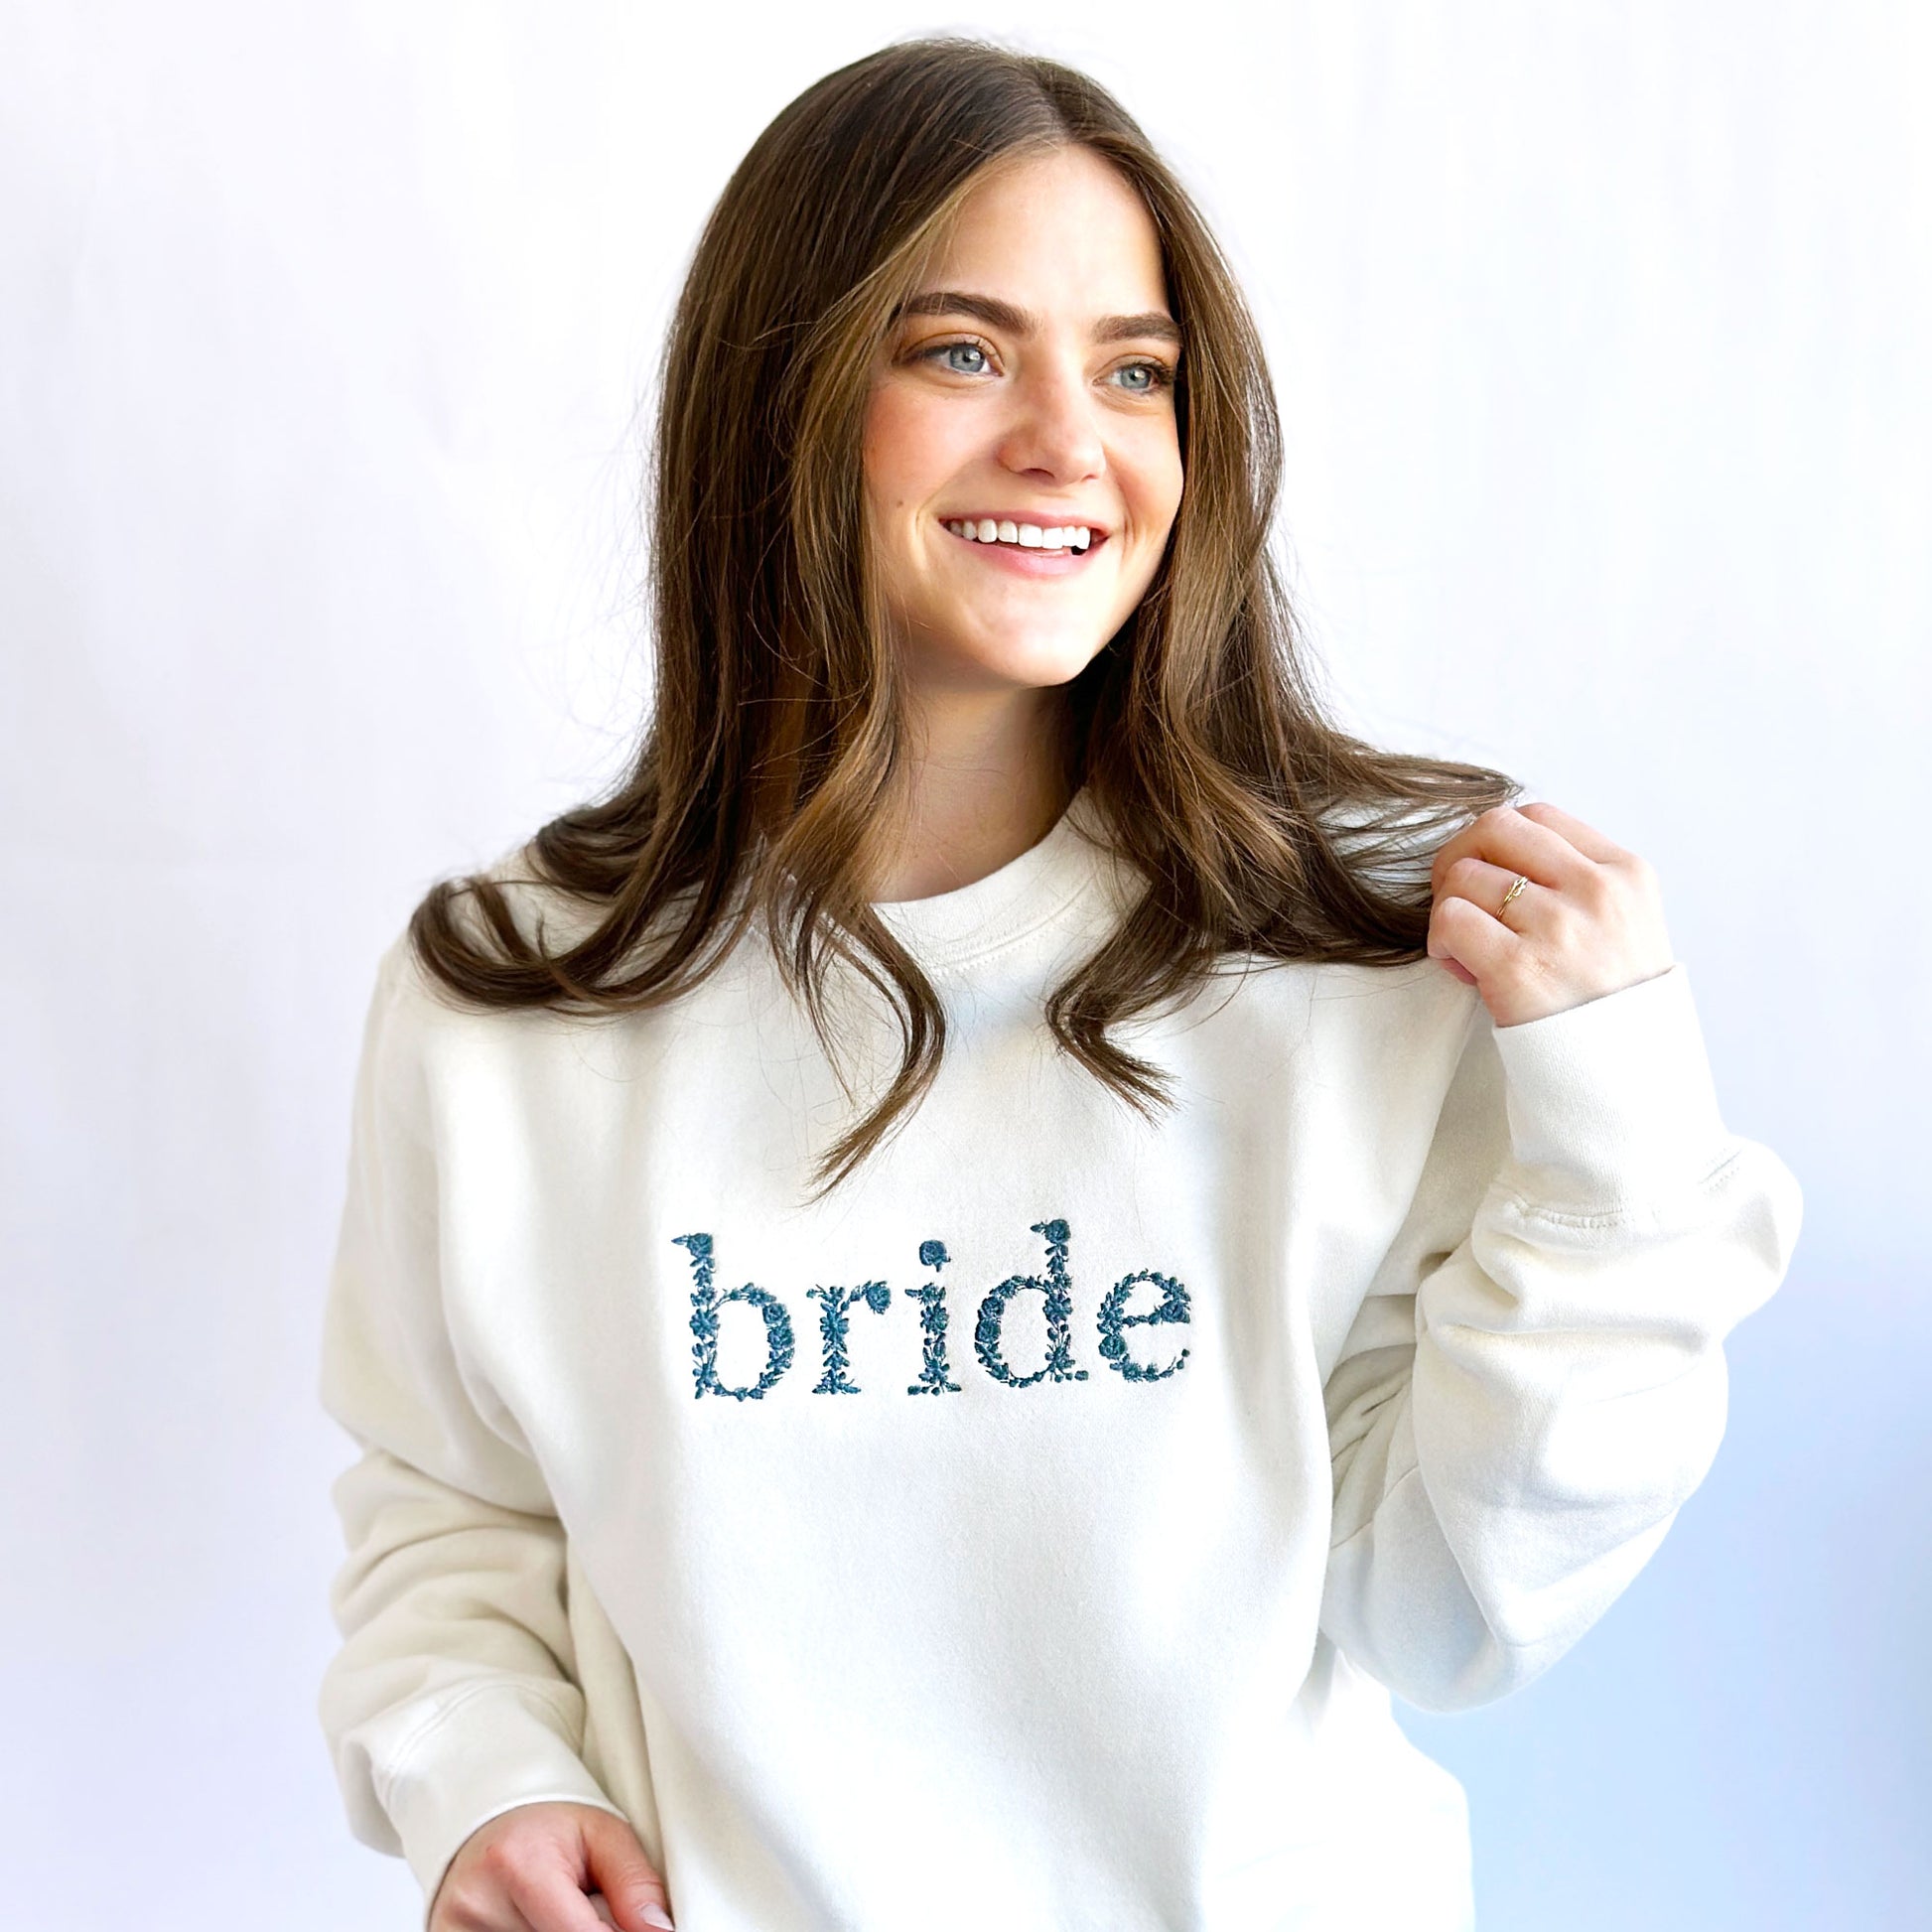 woman wearing a white crewnecksweatshirt with floral lowercase bride embroidered in french blue thread across the chest